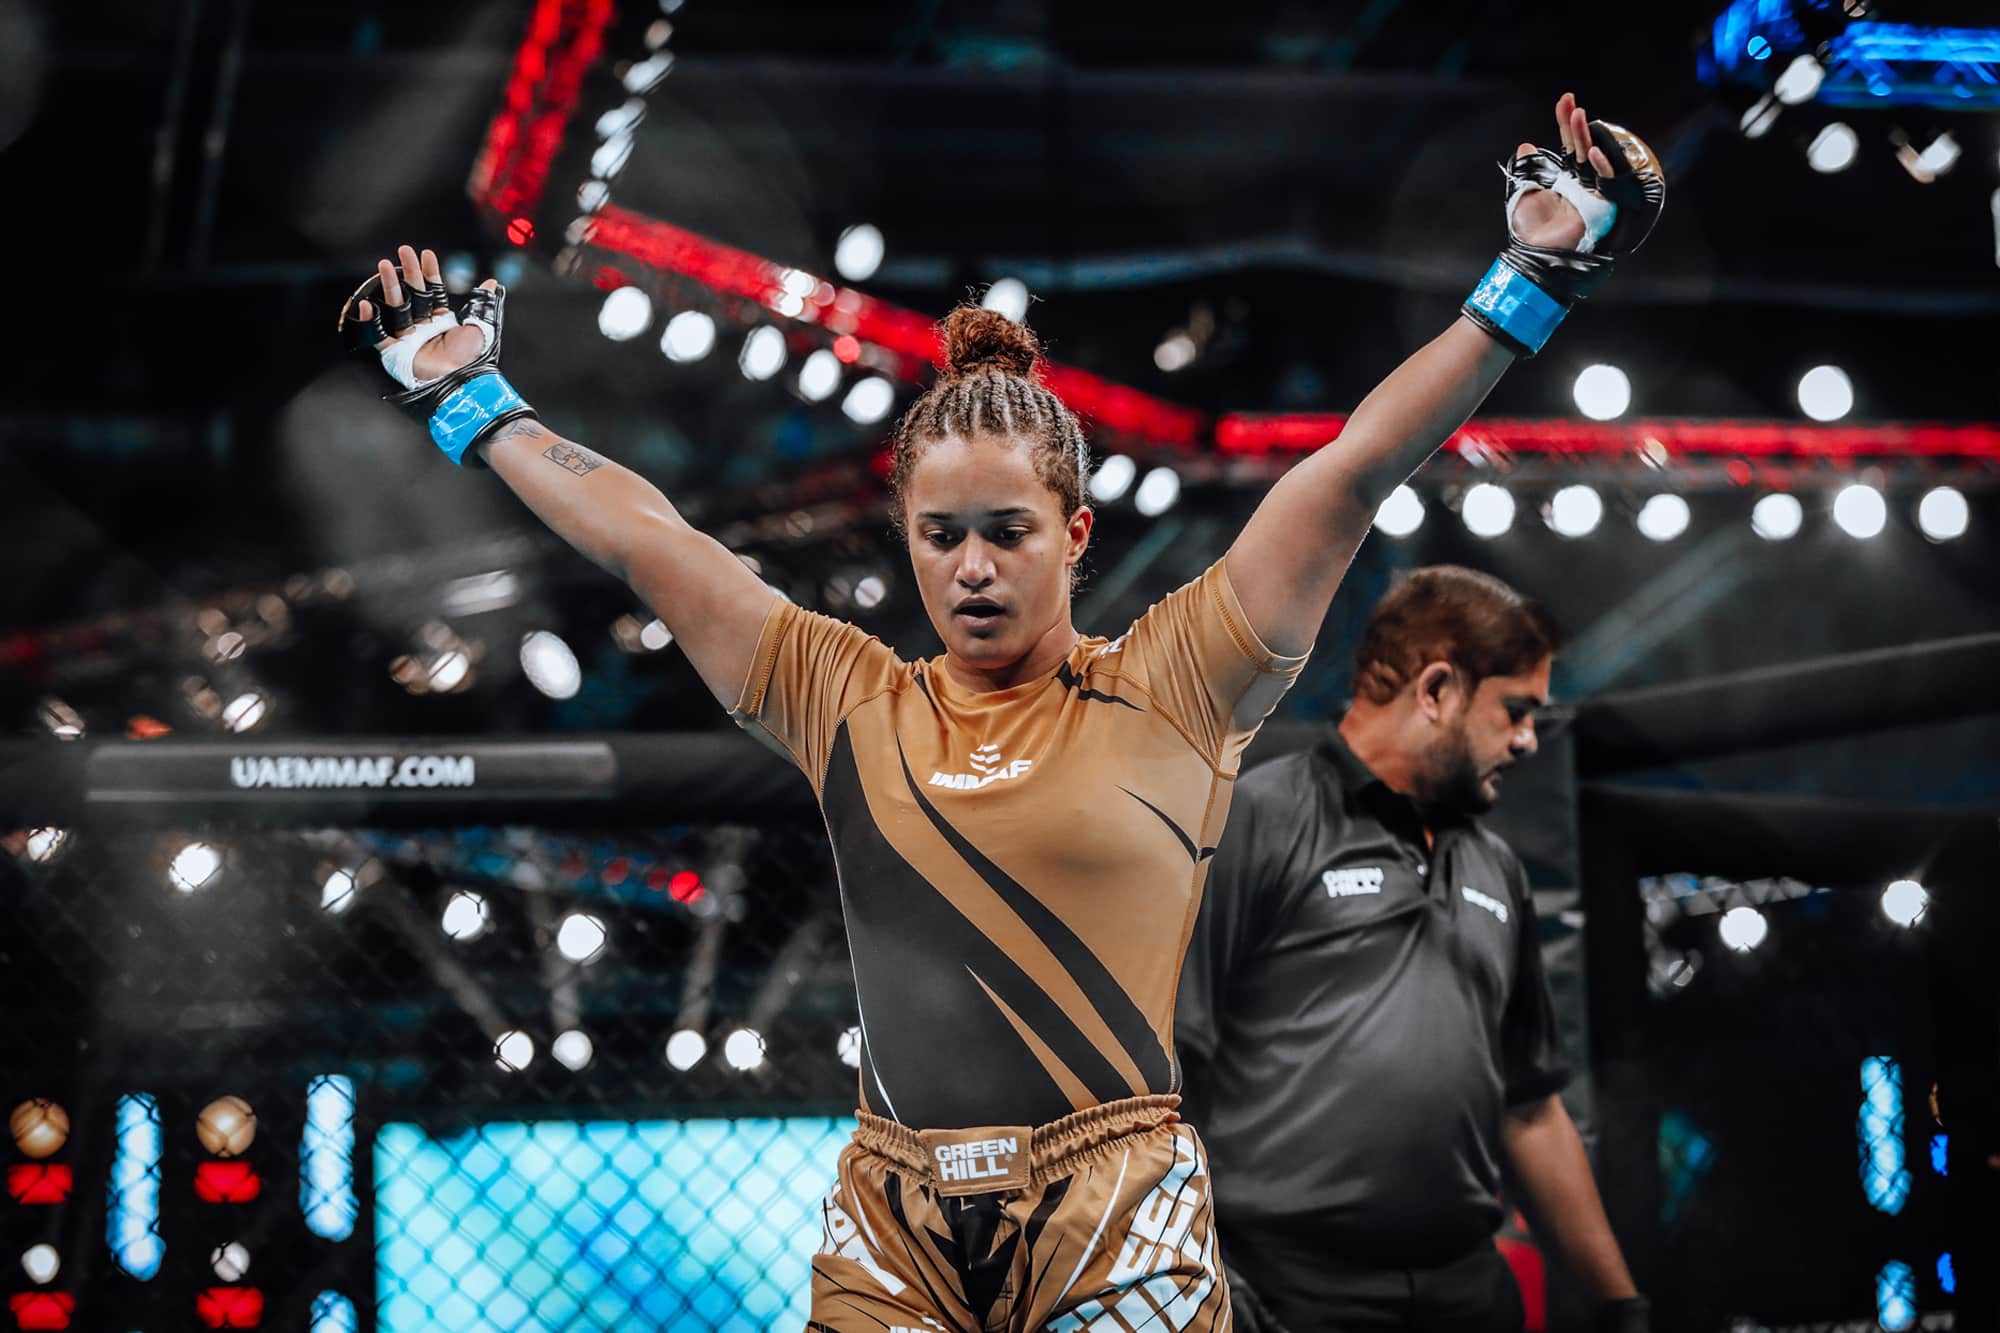 Big day in Women’s Featherweight division sets up semi-final bout between Montague and De Sousa